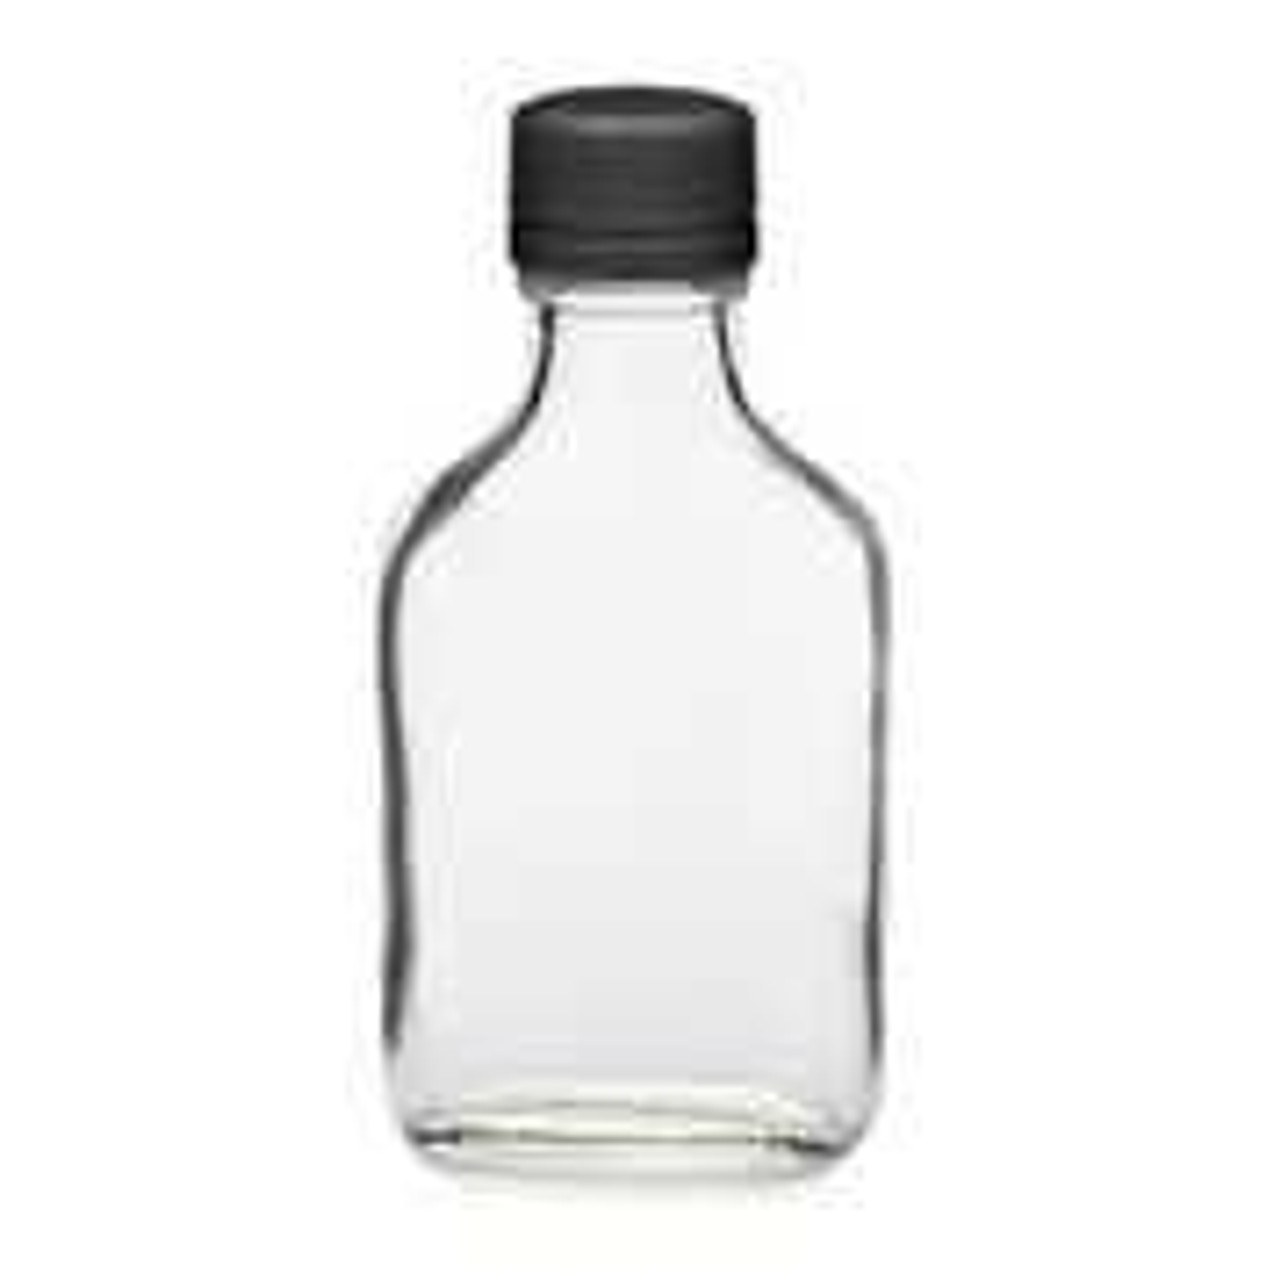 375 ml Flask Glass Bottle with Tamper Evident Cap